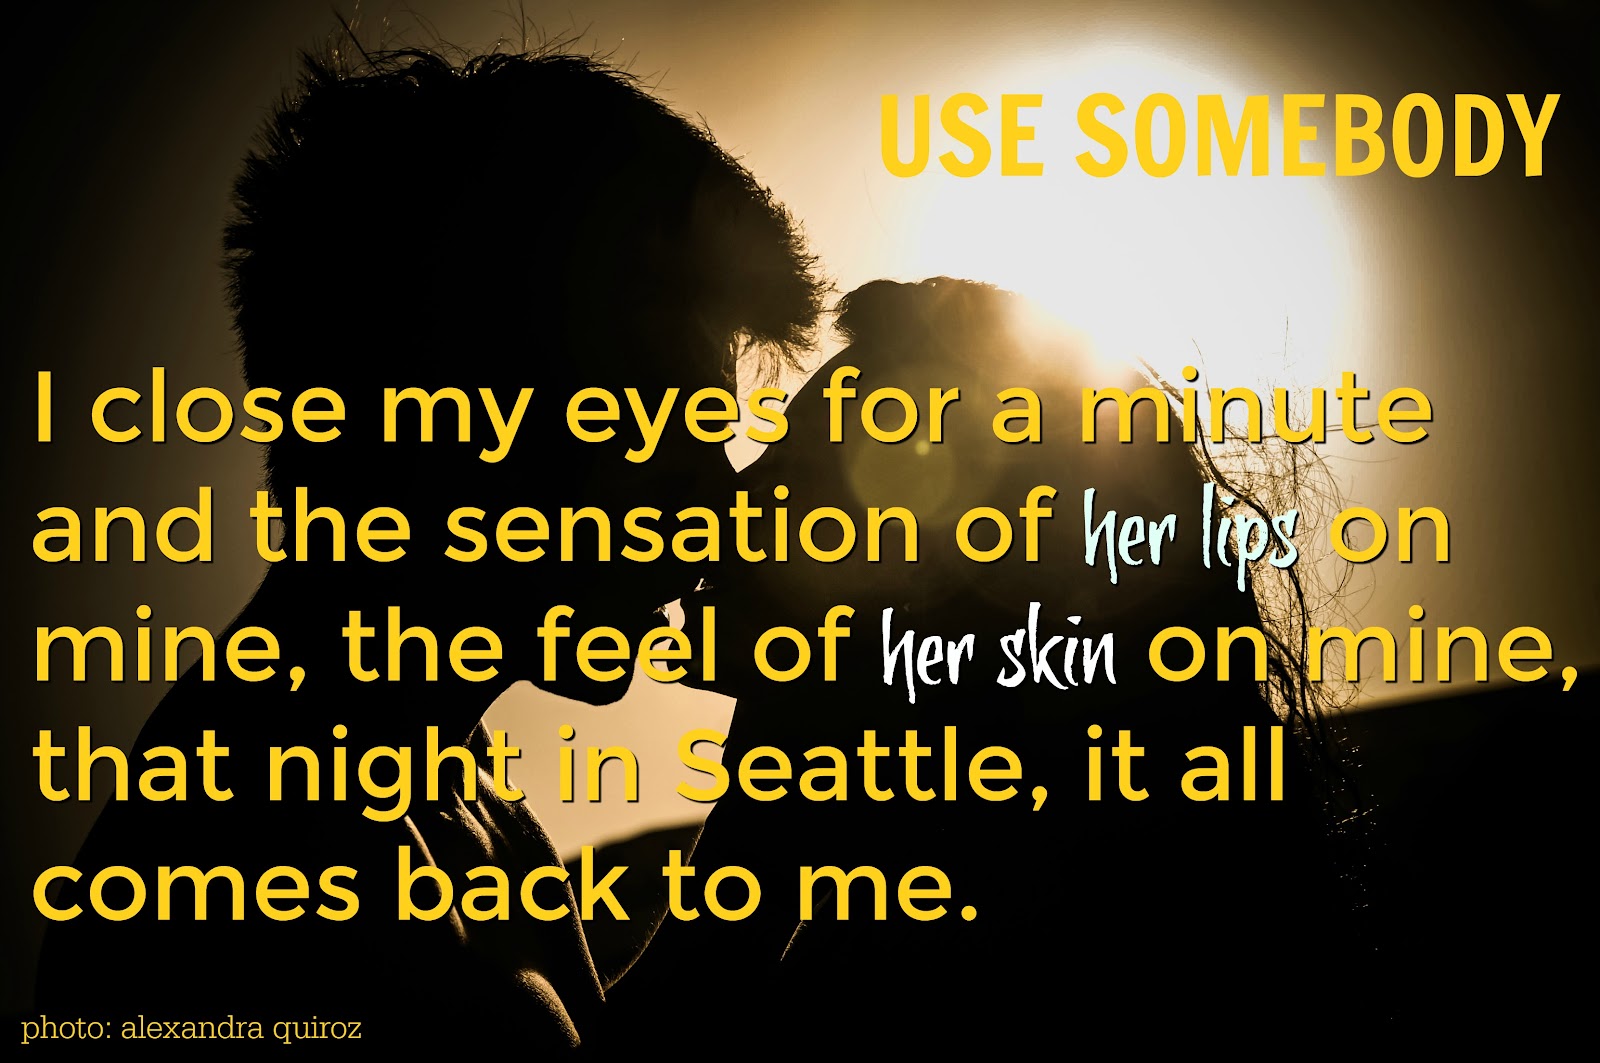 use somebody pic quote 4.jpg